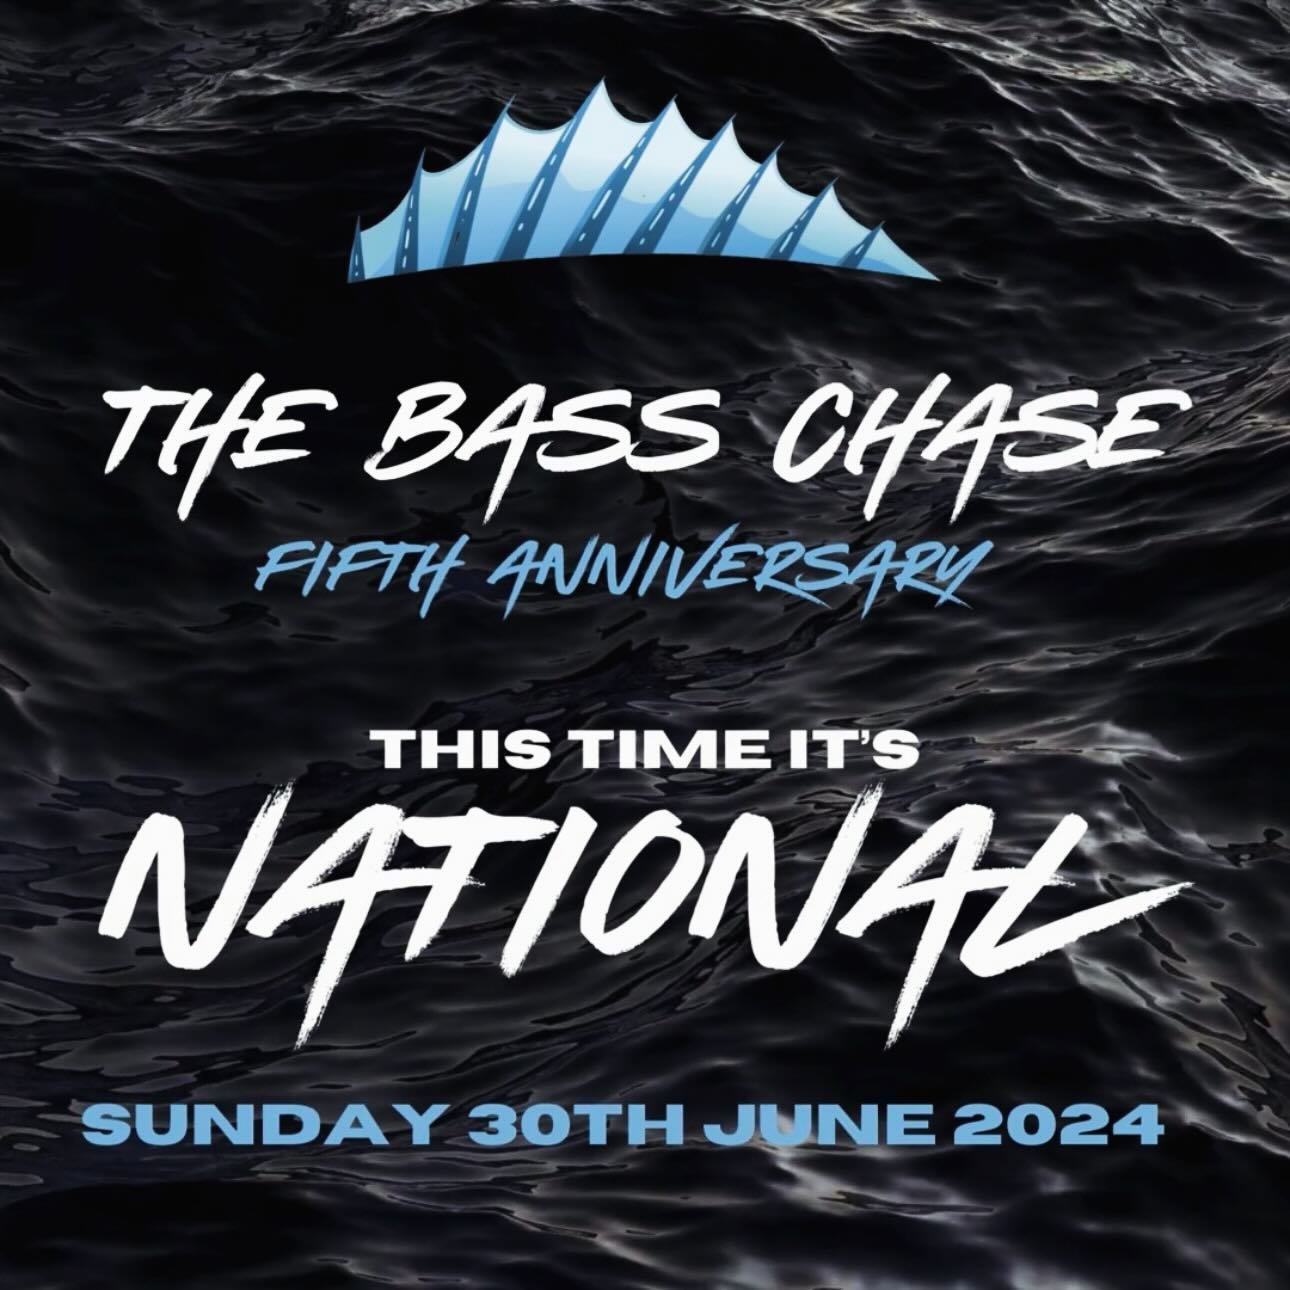 WIN Entry to The Bass Chase National (30/06/24) &amp; Lure Bundle!

TO ENTER:

1️⃣ Make sure you&rsquo;re following @bass_chasers_uk 
2️⃣ Like this post on Facebook and/or Instagram. 

That&rsquo;s it - don&rsquo;t forget to share with your fellow an